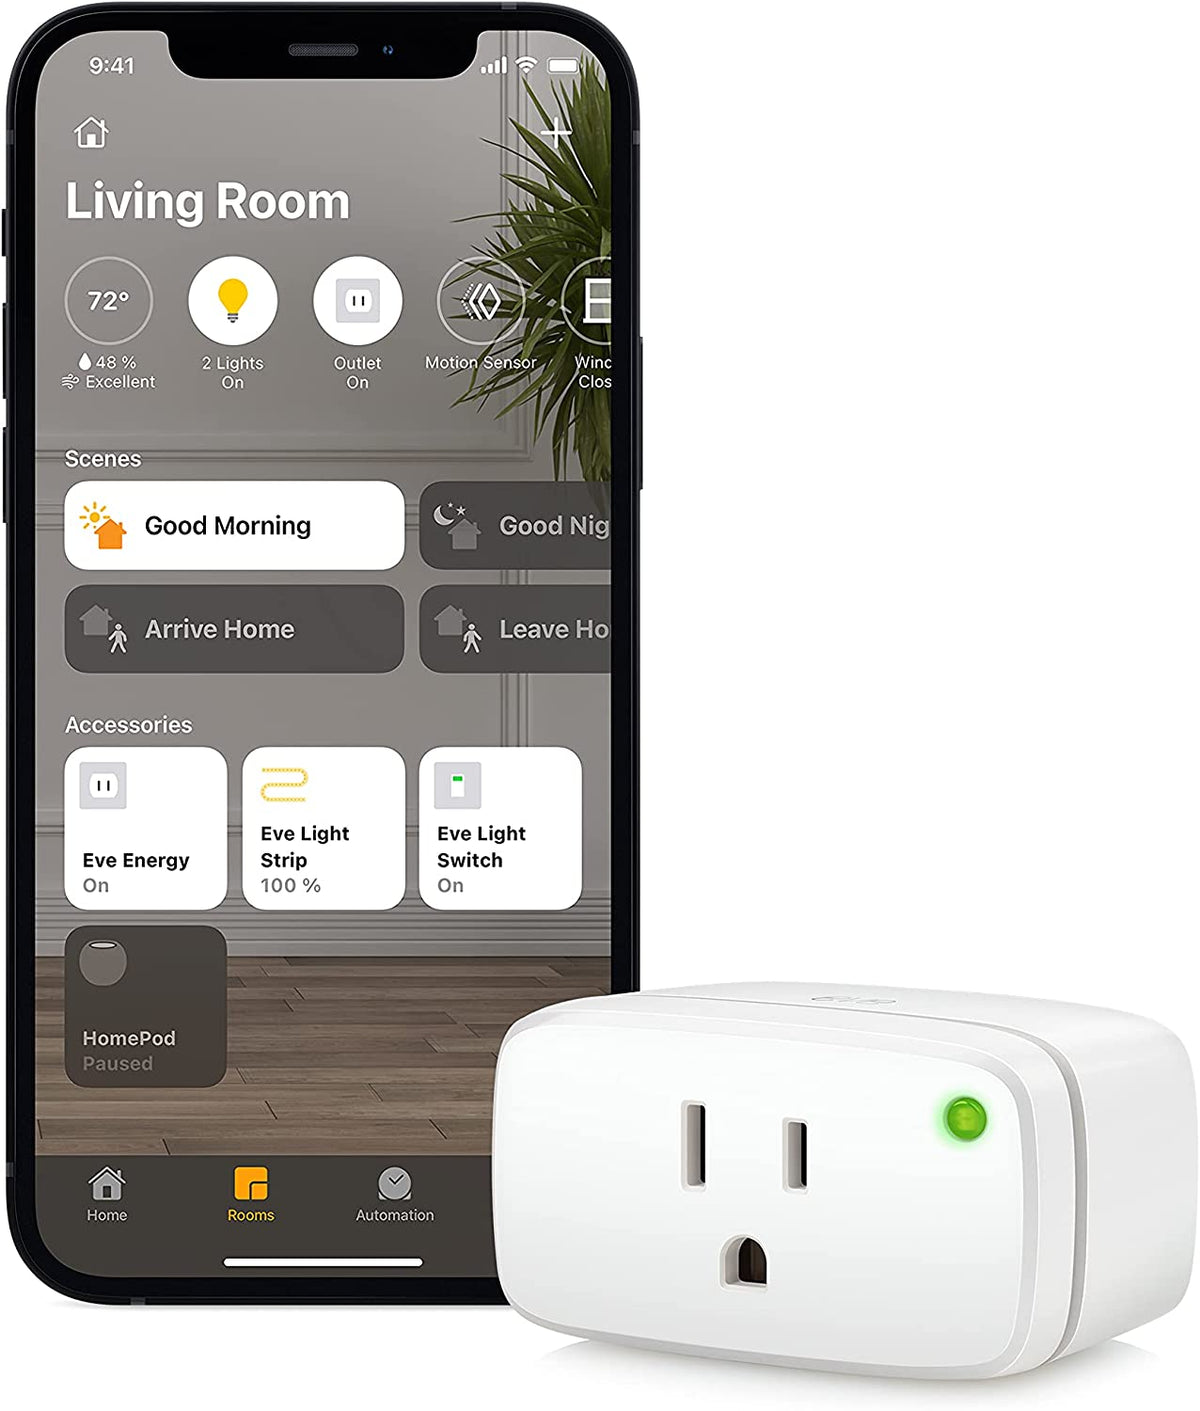 9 HomeKit Compatible Smart-Home Gadgets That You Can Control Using